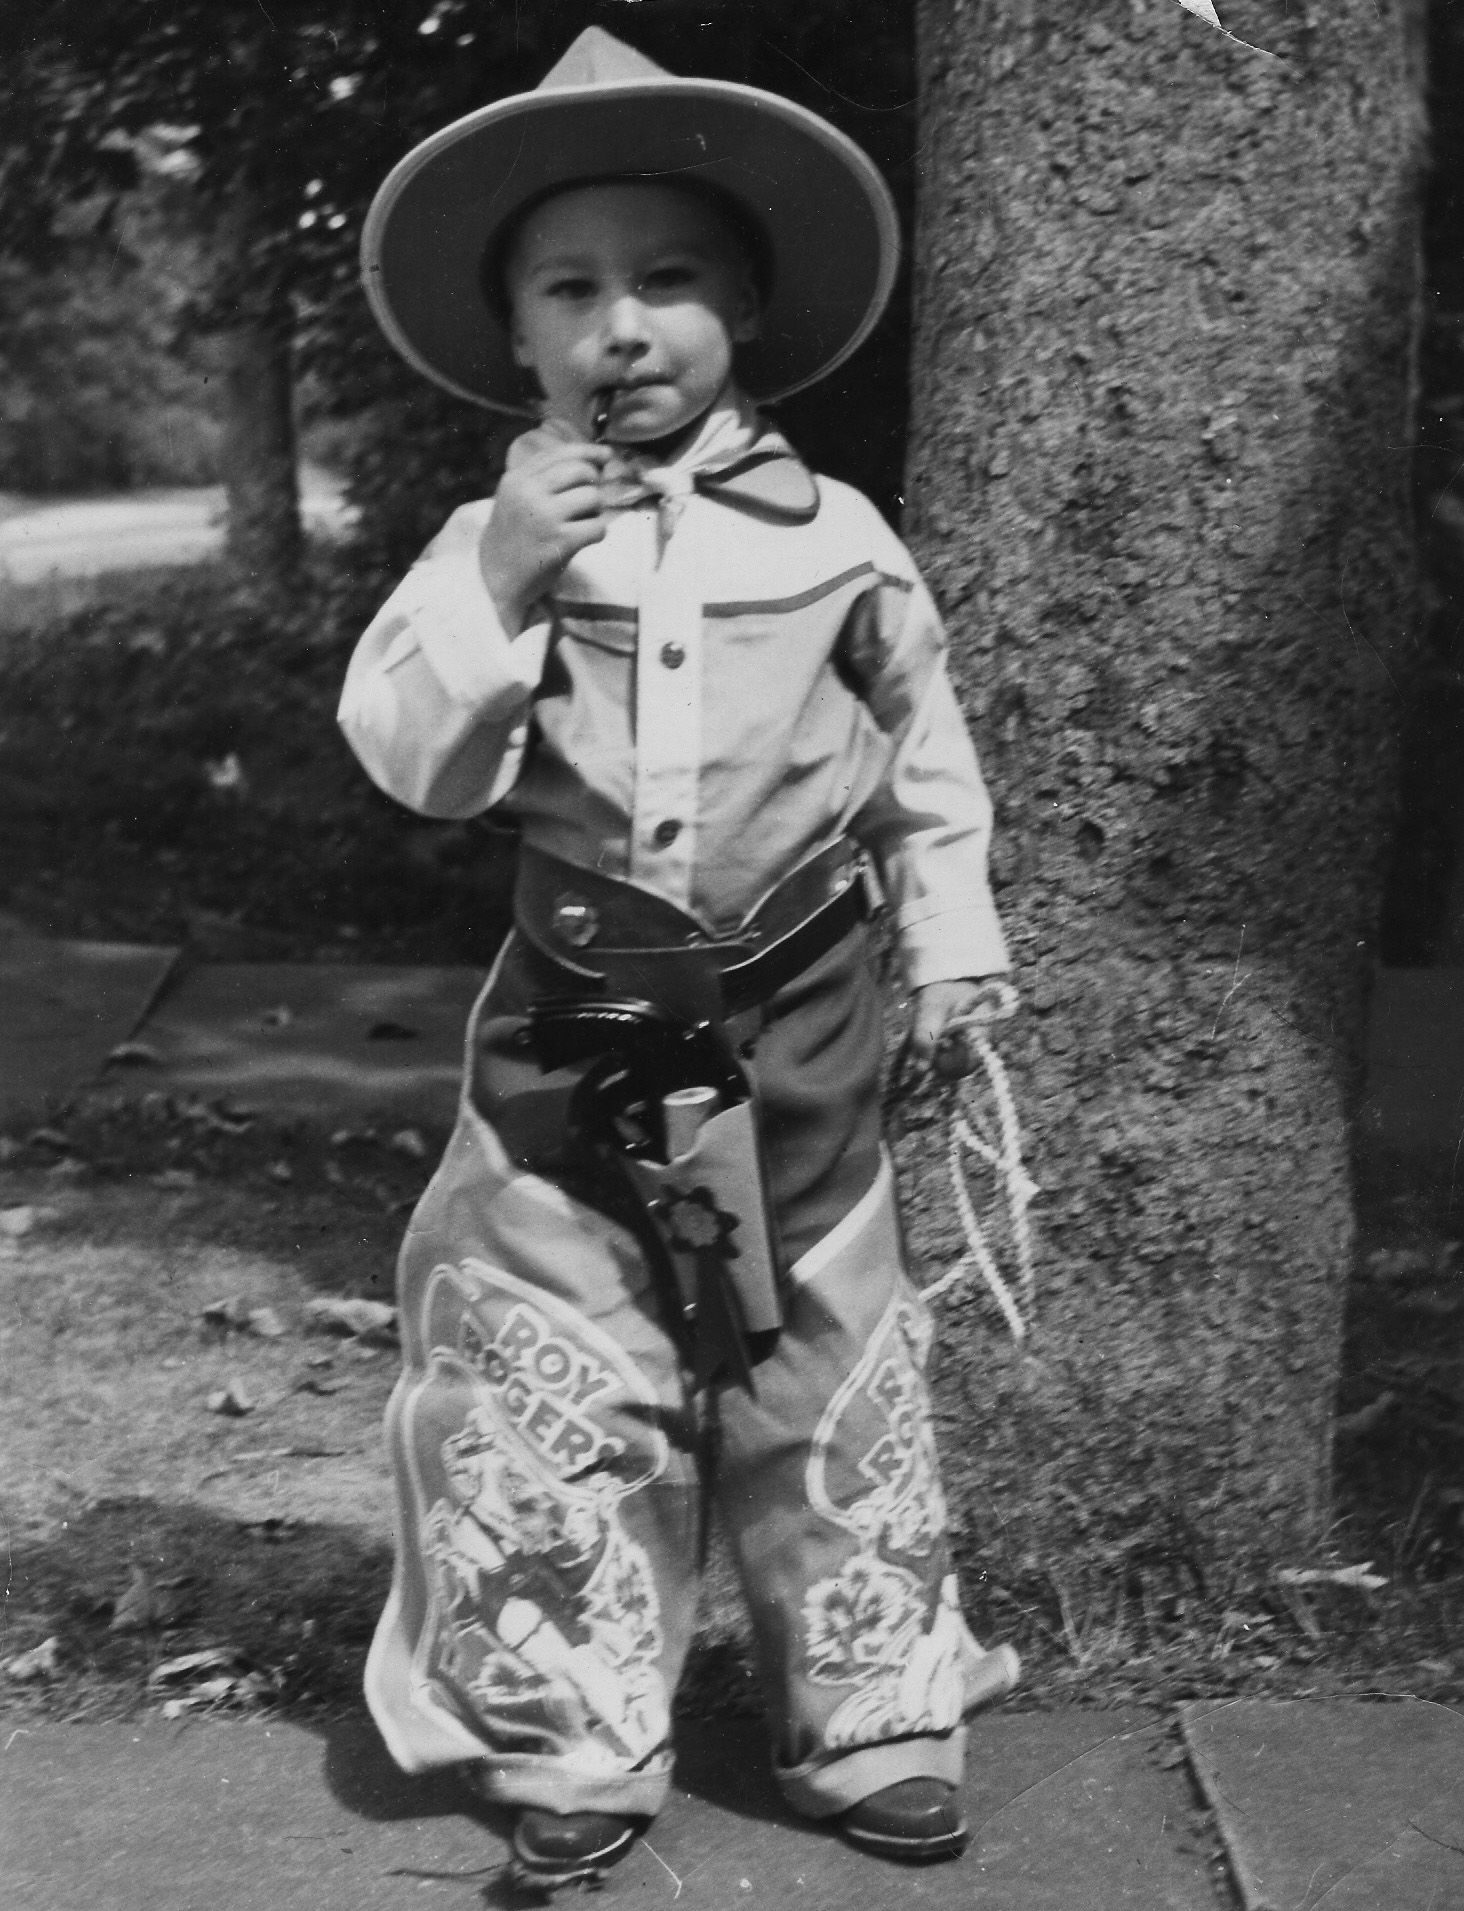 Labor Day visit from my Grandma Witzell. She always brought me a new gun. This time she brought me the complete outfit. 1950 was a great year. View full size.